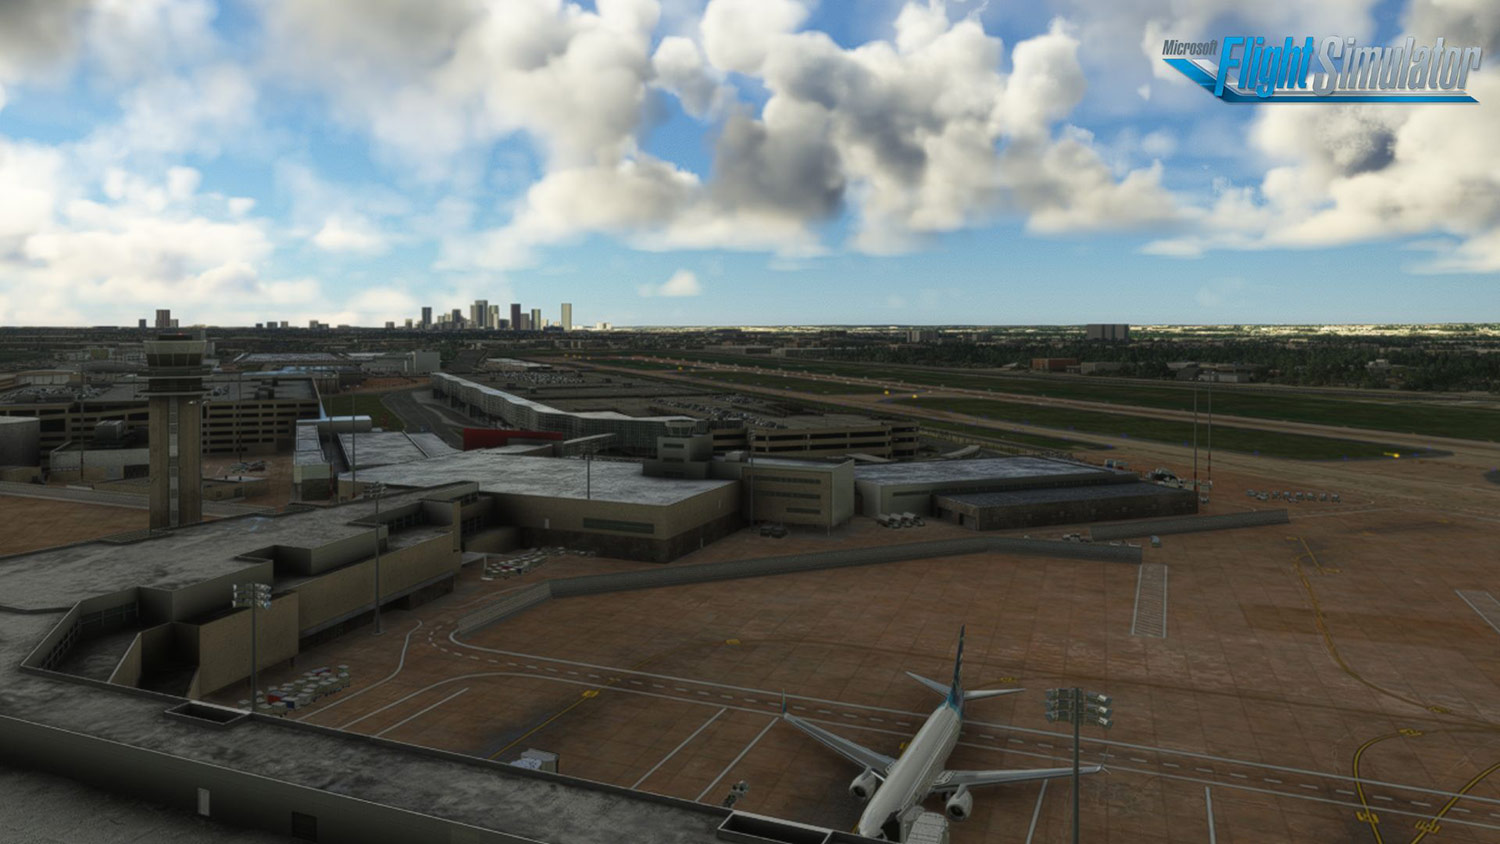 FeelThere - KDAL - Dallas Love Field Airport MSFS